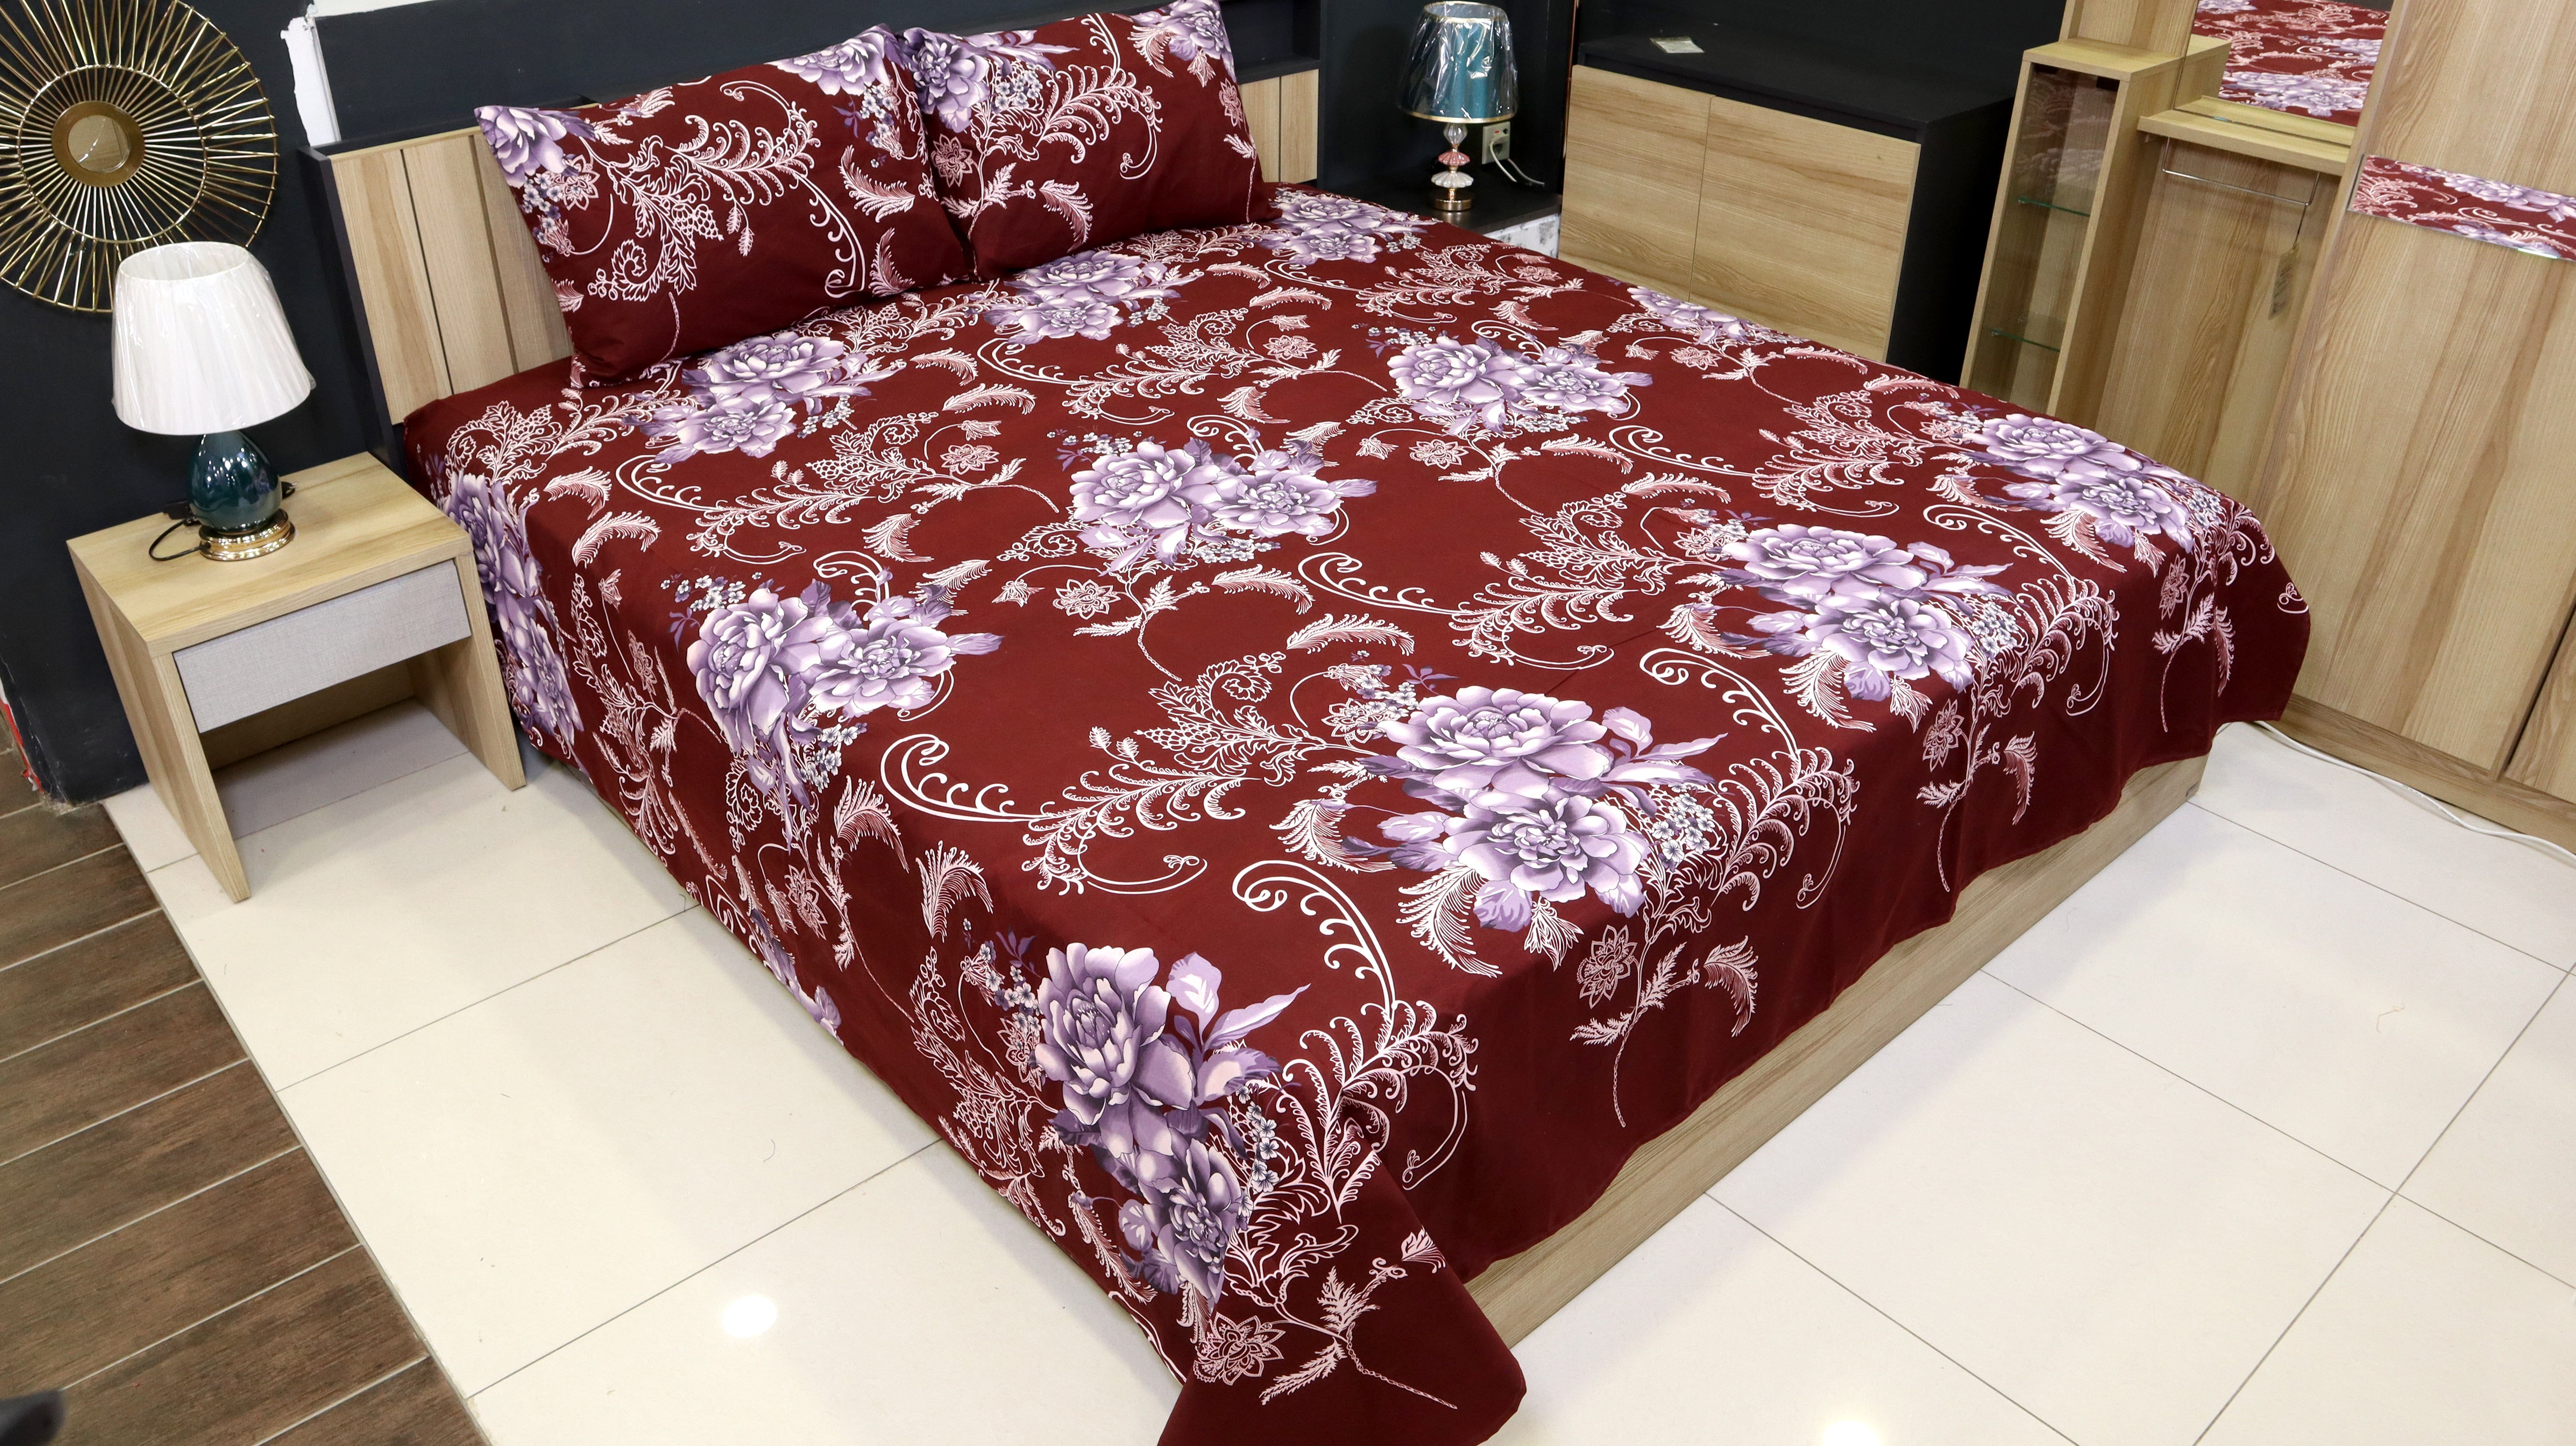 Bed Sheet Fantasy King Bed-Cherry Blossom